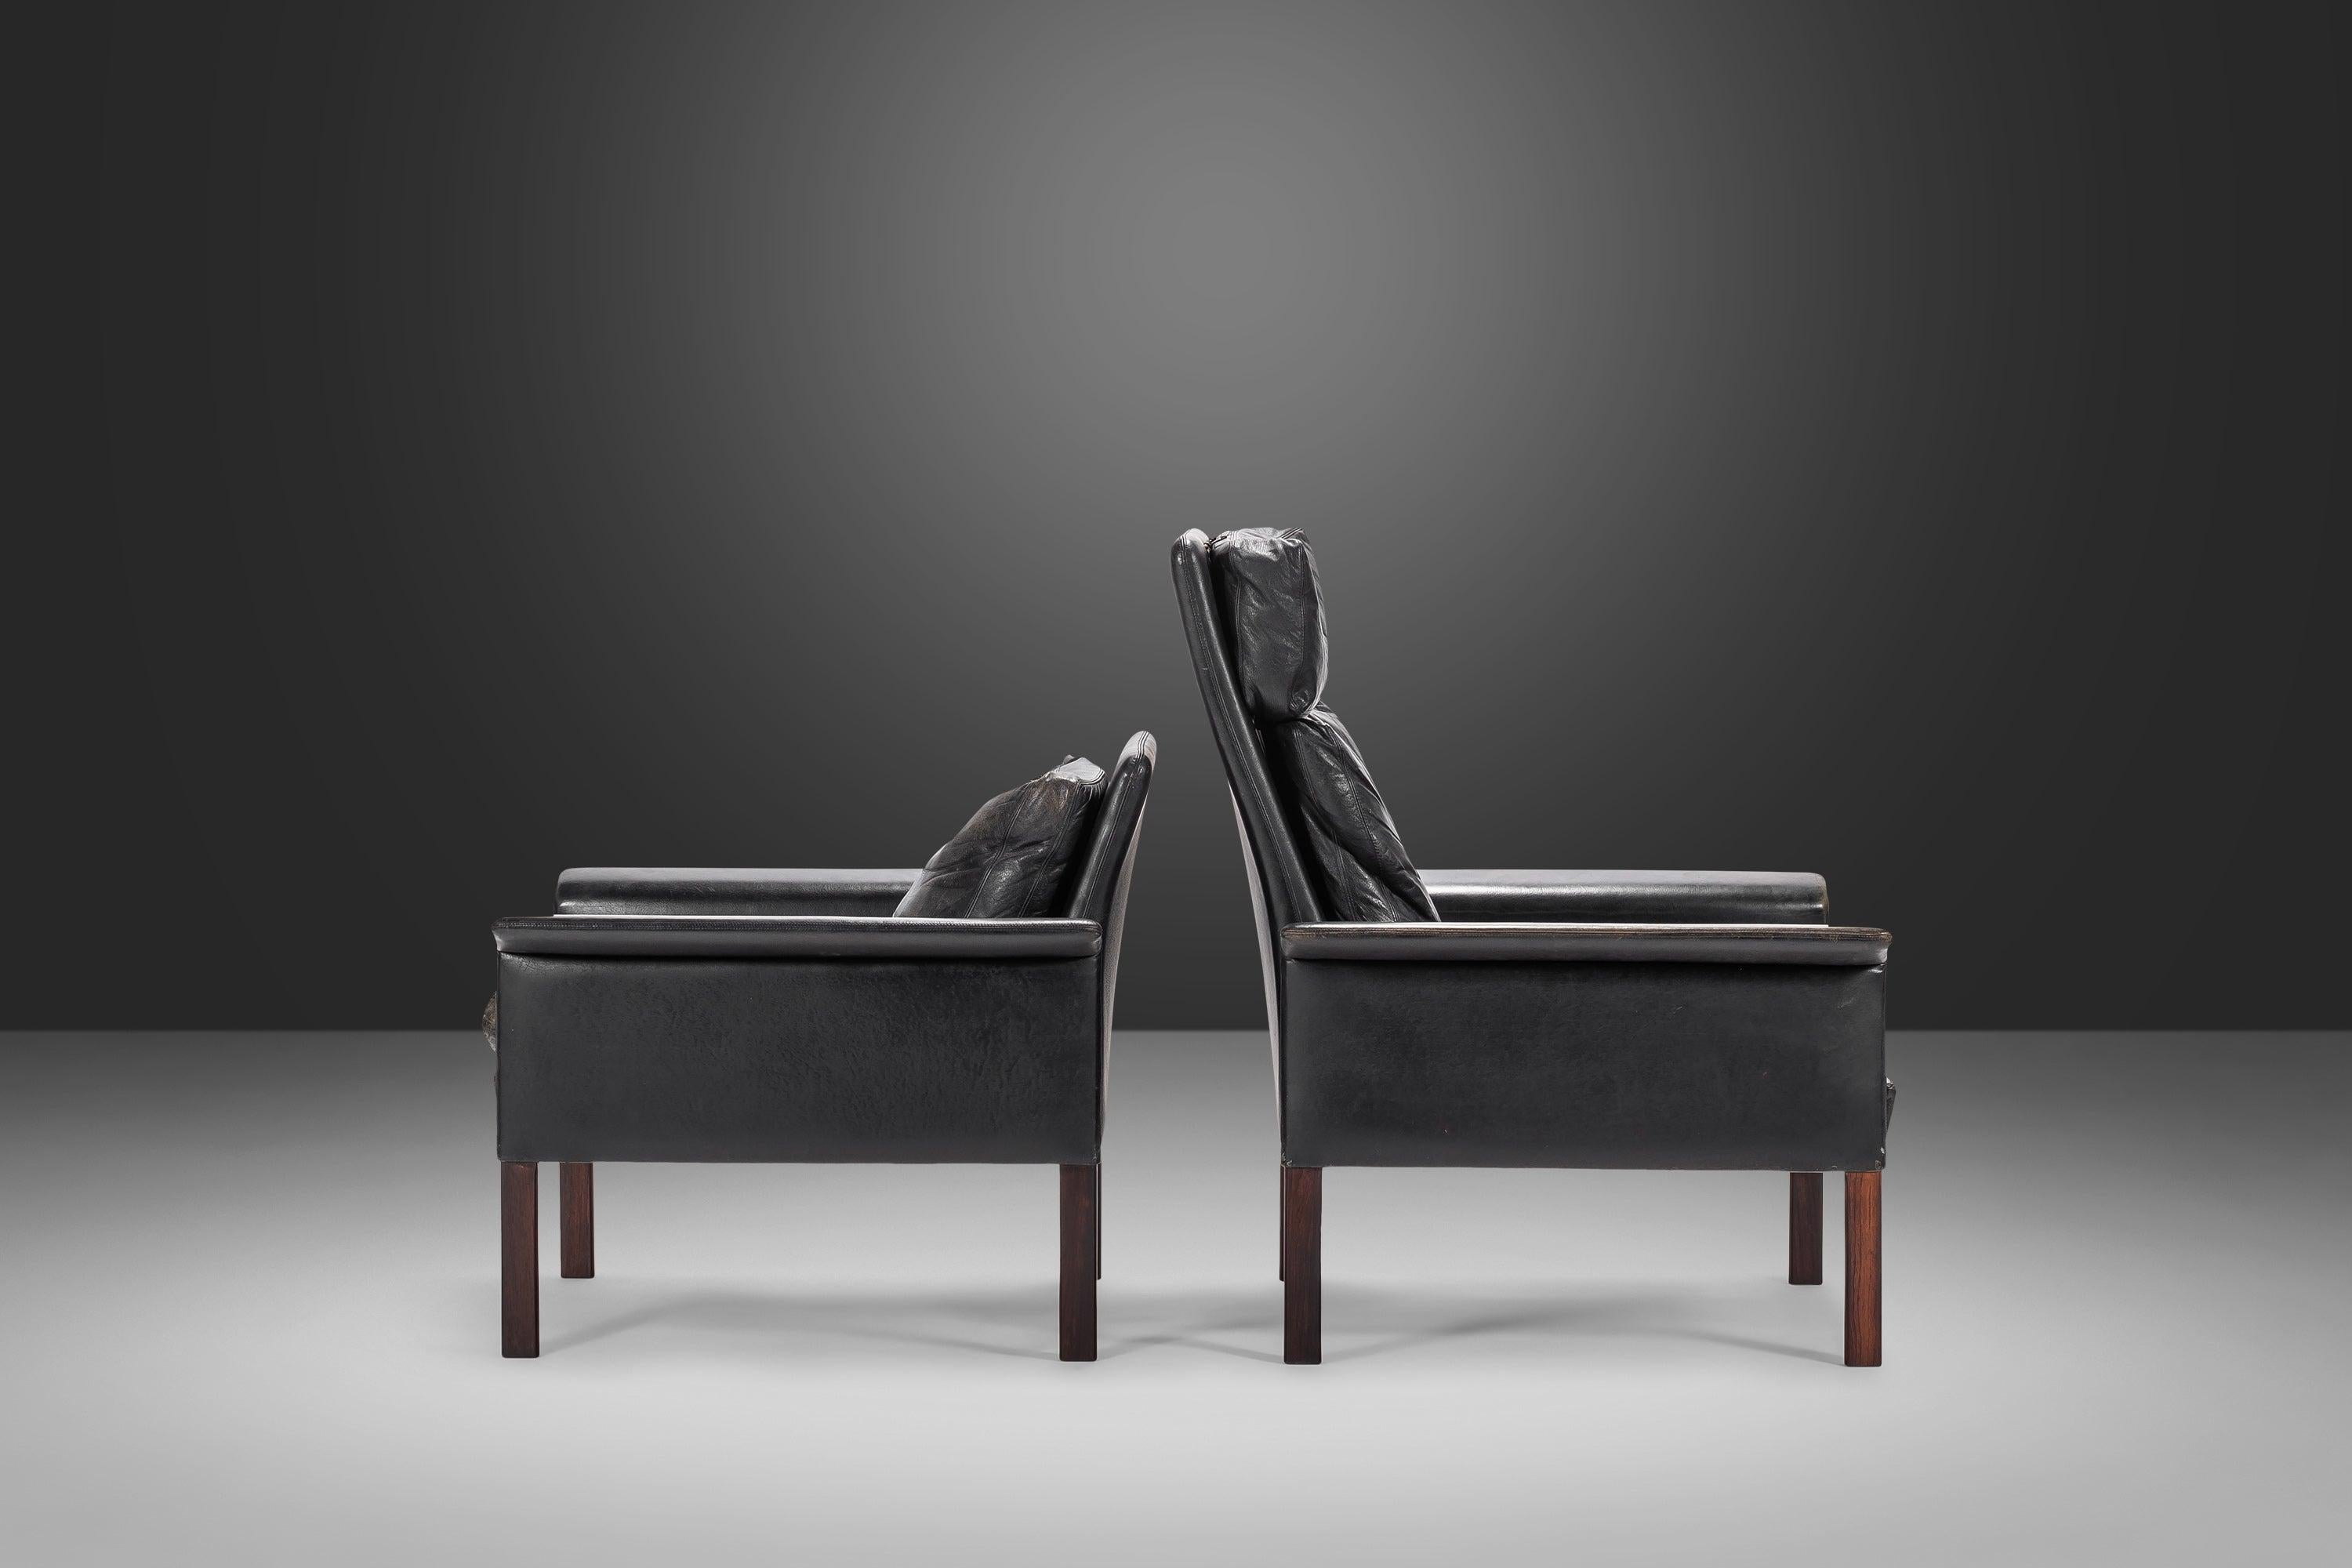 Perfectly worn in black leather and rosewood model #500 his and hers lounge chairs by Hans Olsen for CS Møbler Glostrup made in Denmark. Constructed of solid Brazilian rosewood and original patina'd genuine leather this modern design is